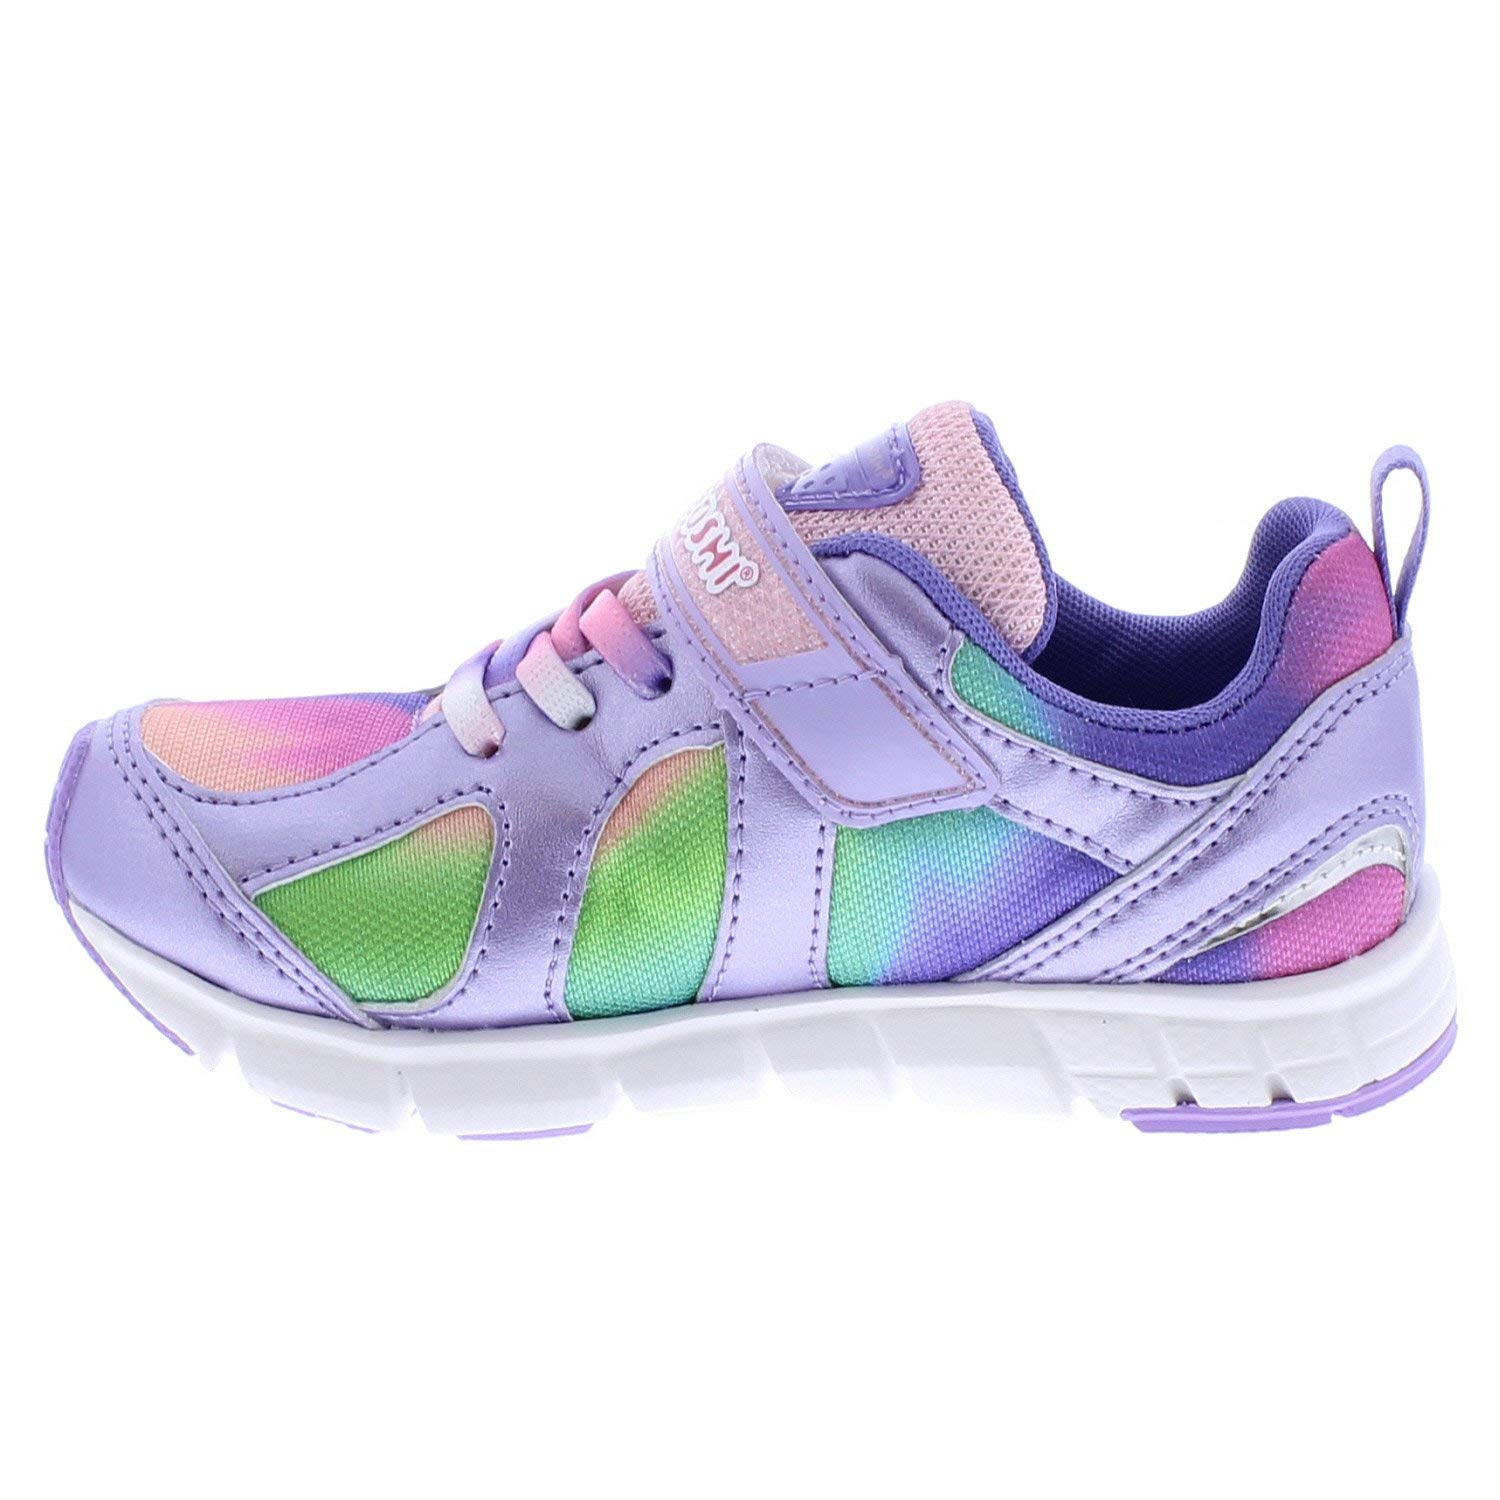 TSUKIHOSHI 3584 Rainbow Strap-Closure Machine-Washable Shoes for Boys and Girls with Wide Toe Box and Slip-Resistant, Non-Marking Outsole - Toddlers and Little Kids, Ages 1-8